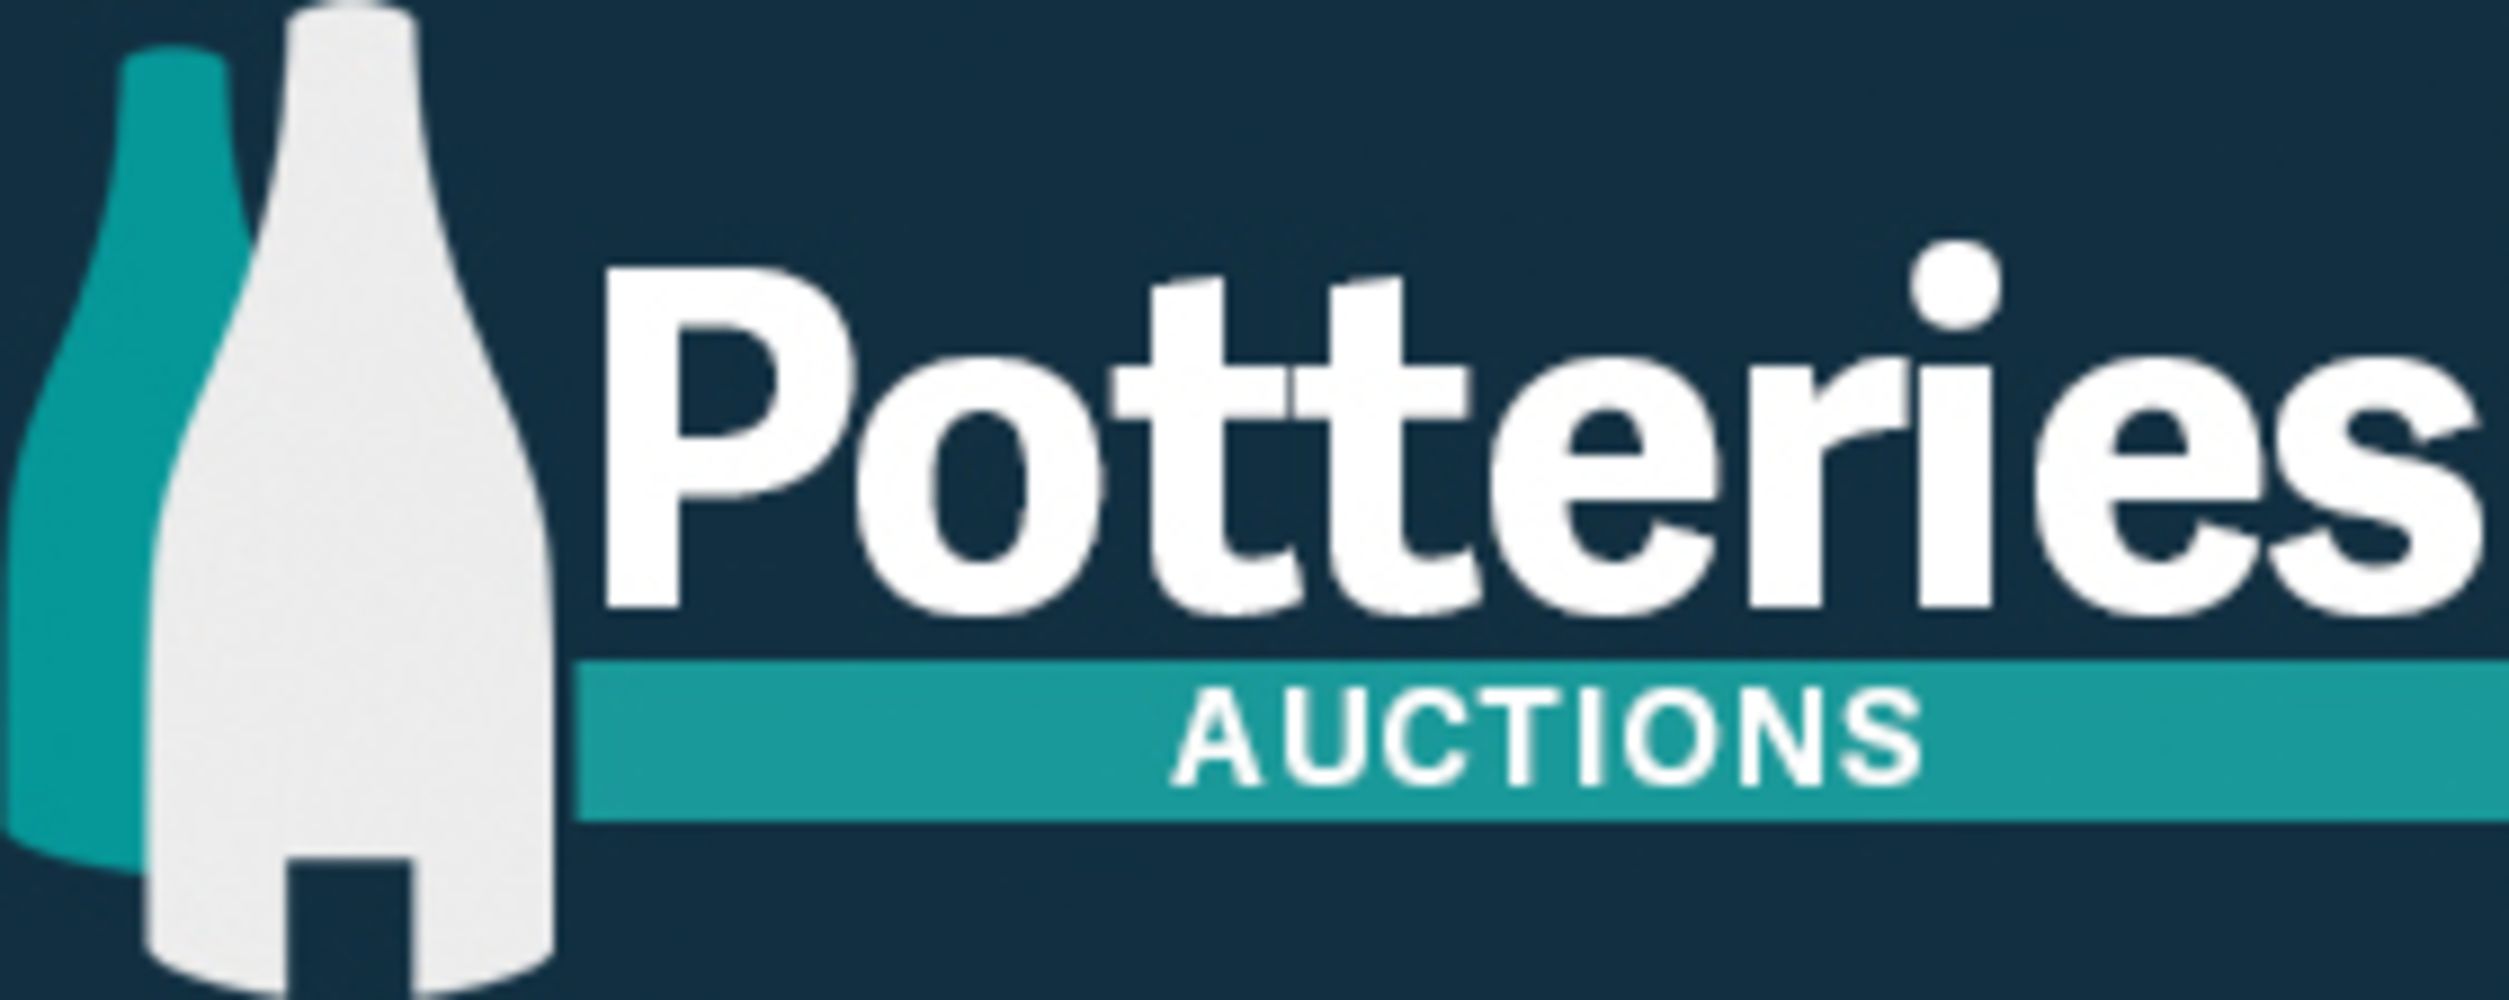 April Online Auction of 20th Century Pottery, Collectables, Jewellery.